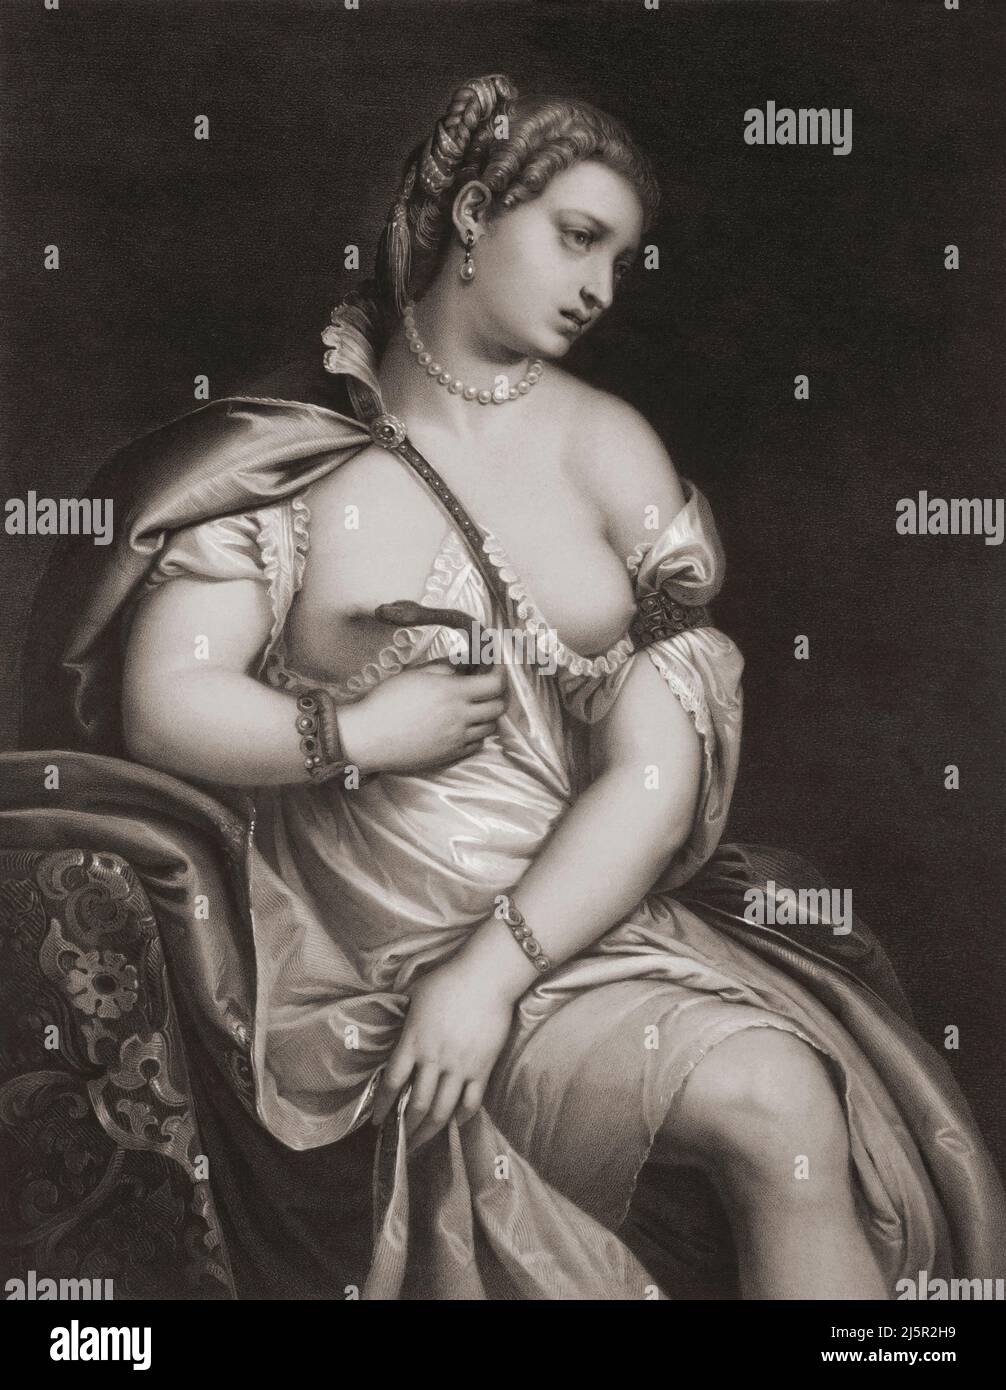 Cleopatra VII Philopator, 69 BC – 30 BC.  Queen of the Ptolemaic Kingdom of Egypt, clasps a venomous snake to he bosom in her act of suicide.  After the painting by Paolo Veronese engraved by Karl von Piloty. Stock Photo